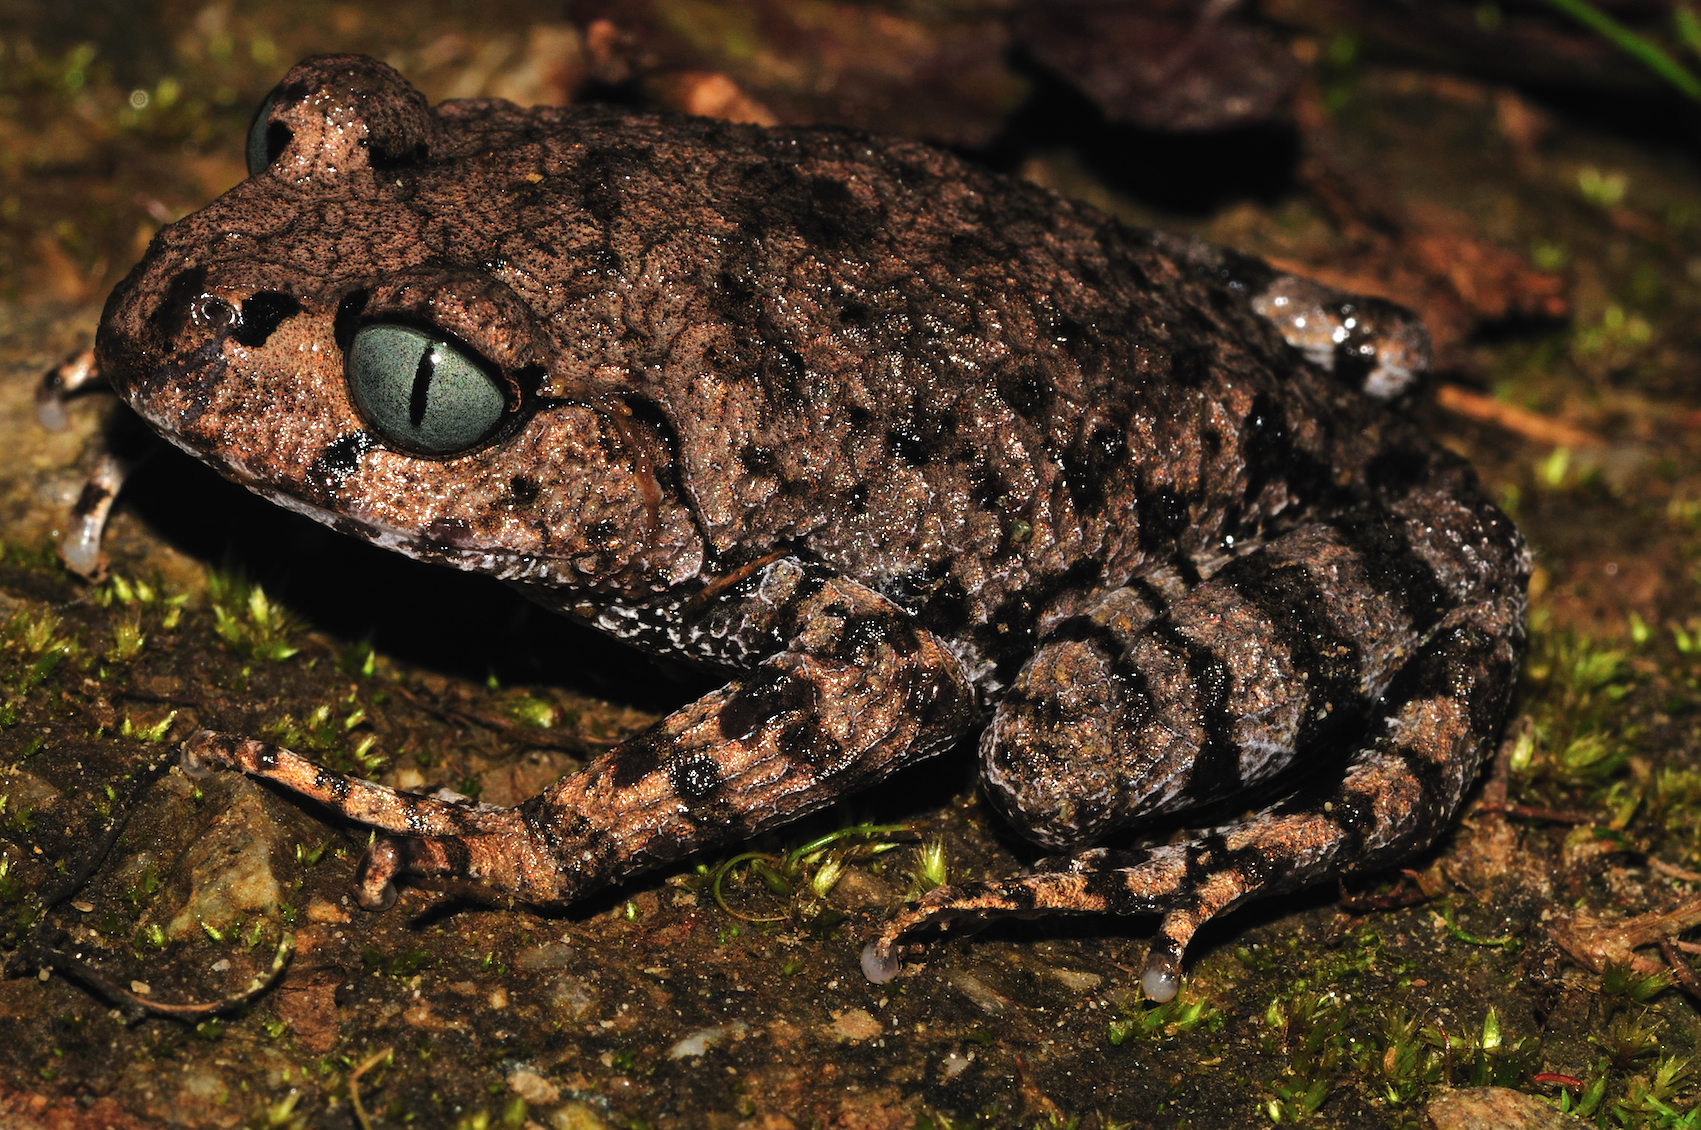 Discovered in Arunachal Pradesh, the second most heavily forested state in India, the Leptobrachium Bompu frog is characterized by its greyish-blue iris with a vertically oriented black pupil. L. bompu has black bands on its limbs, feet, digits and upper lip, as well as irregular dark markings on its dorsal surface.